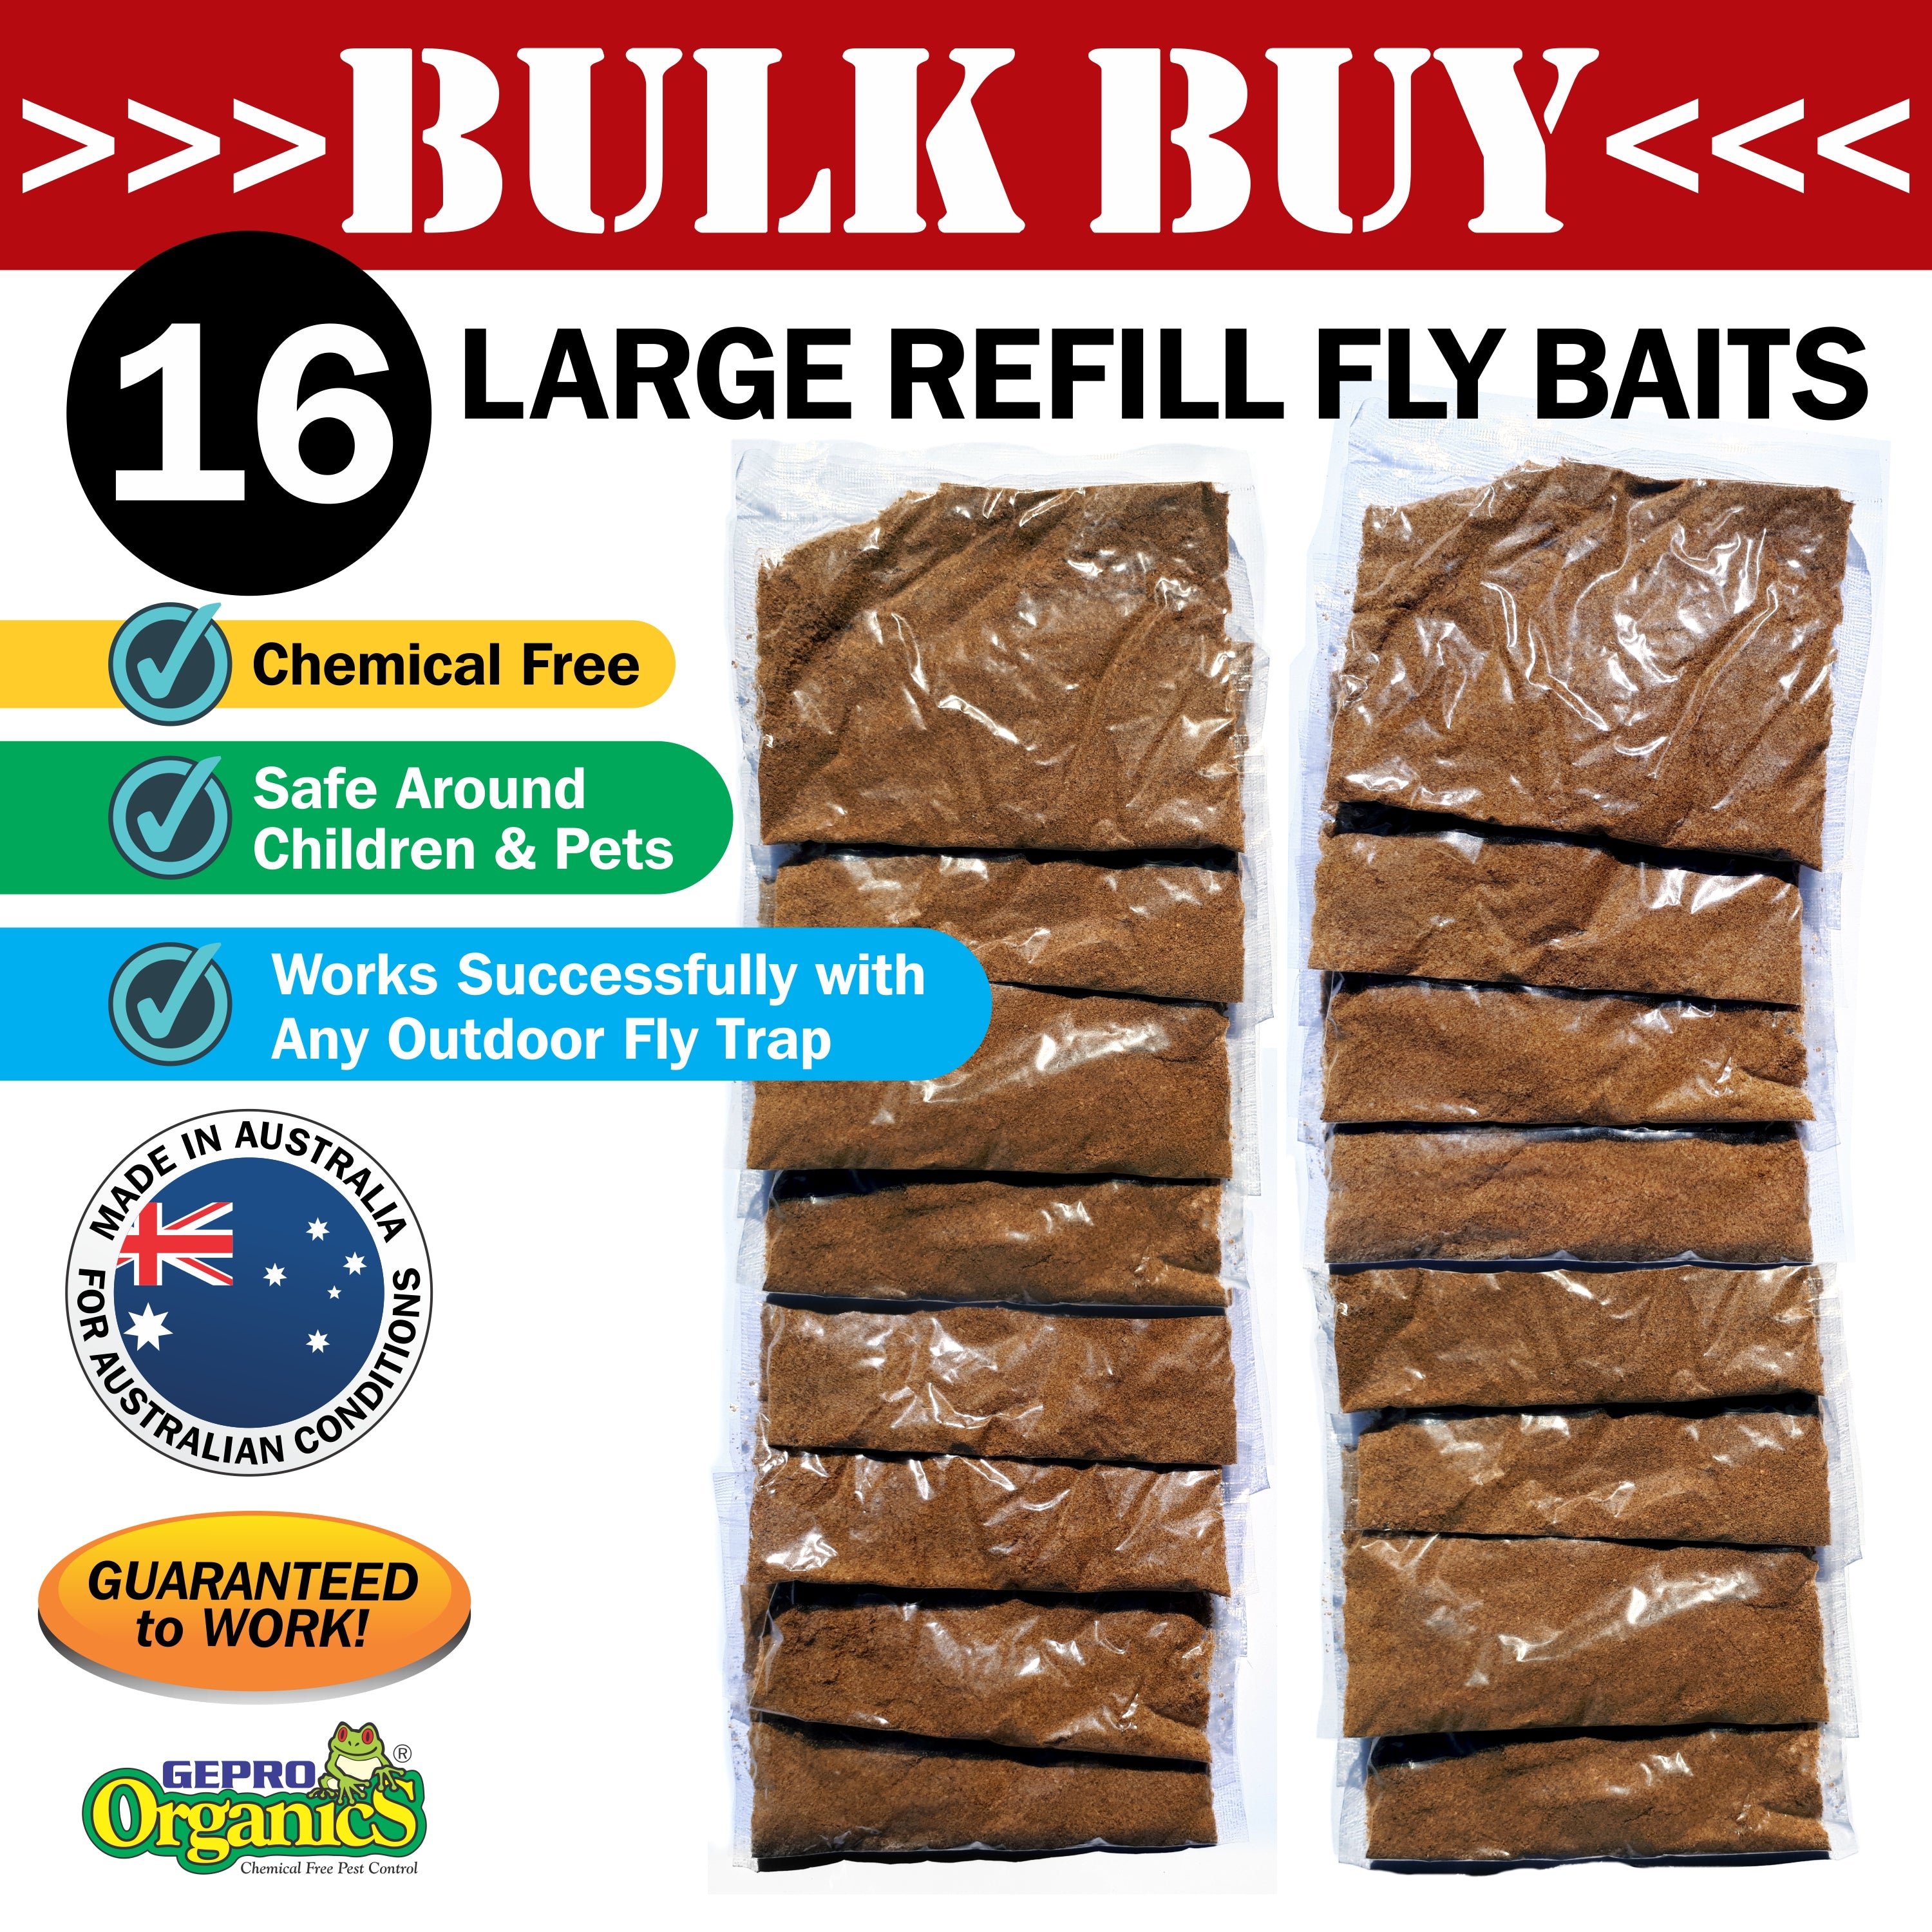 16 Extra Large Fly Trap Bait Refill Sachets - Aussie Made Fly Bait That Works